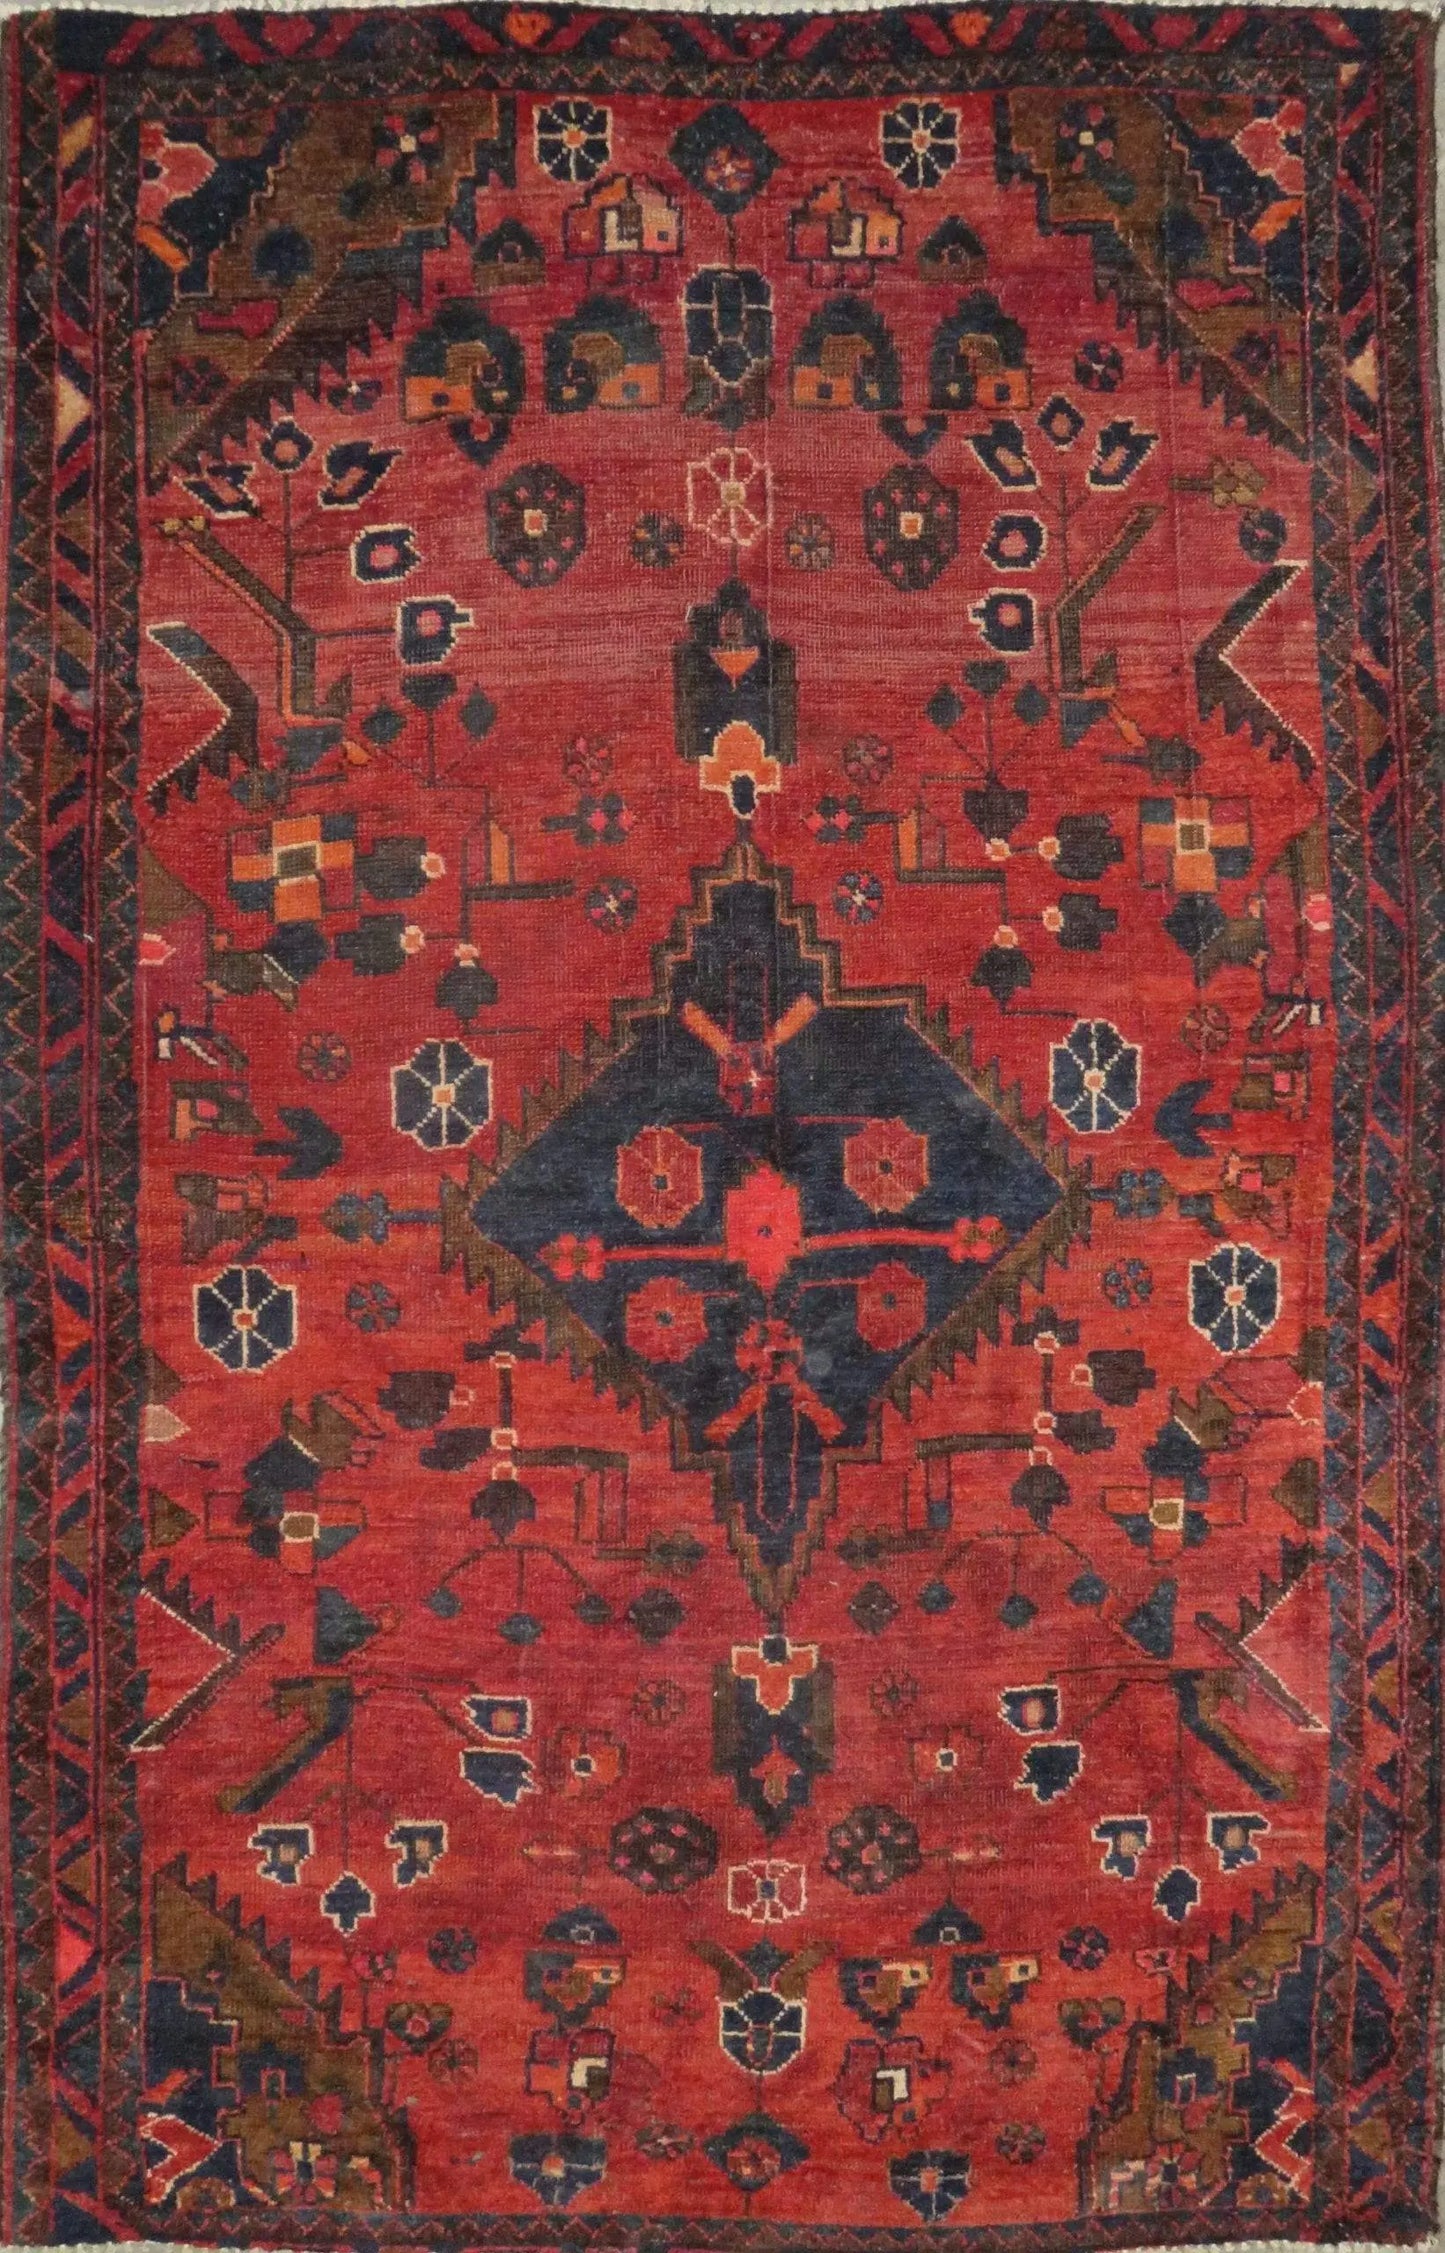 Hand-Knotted Persian Wool Rug _ Luxurious Vintage Design, 6'8" x 4'4", Artisan Crafted